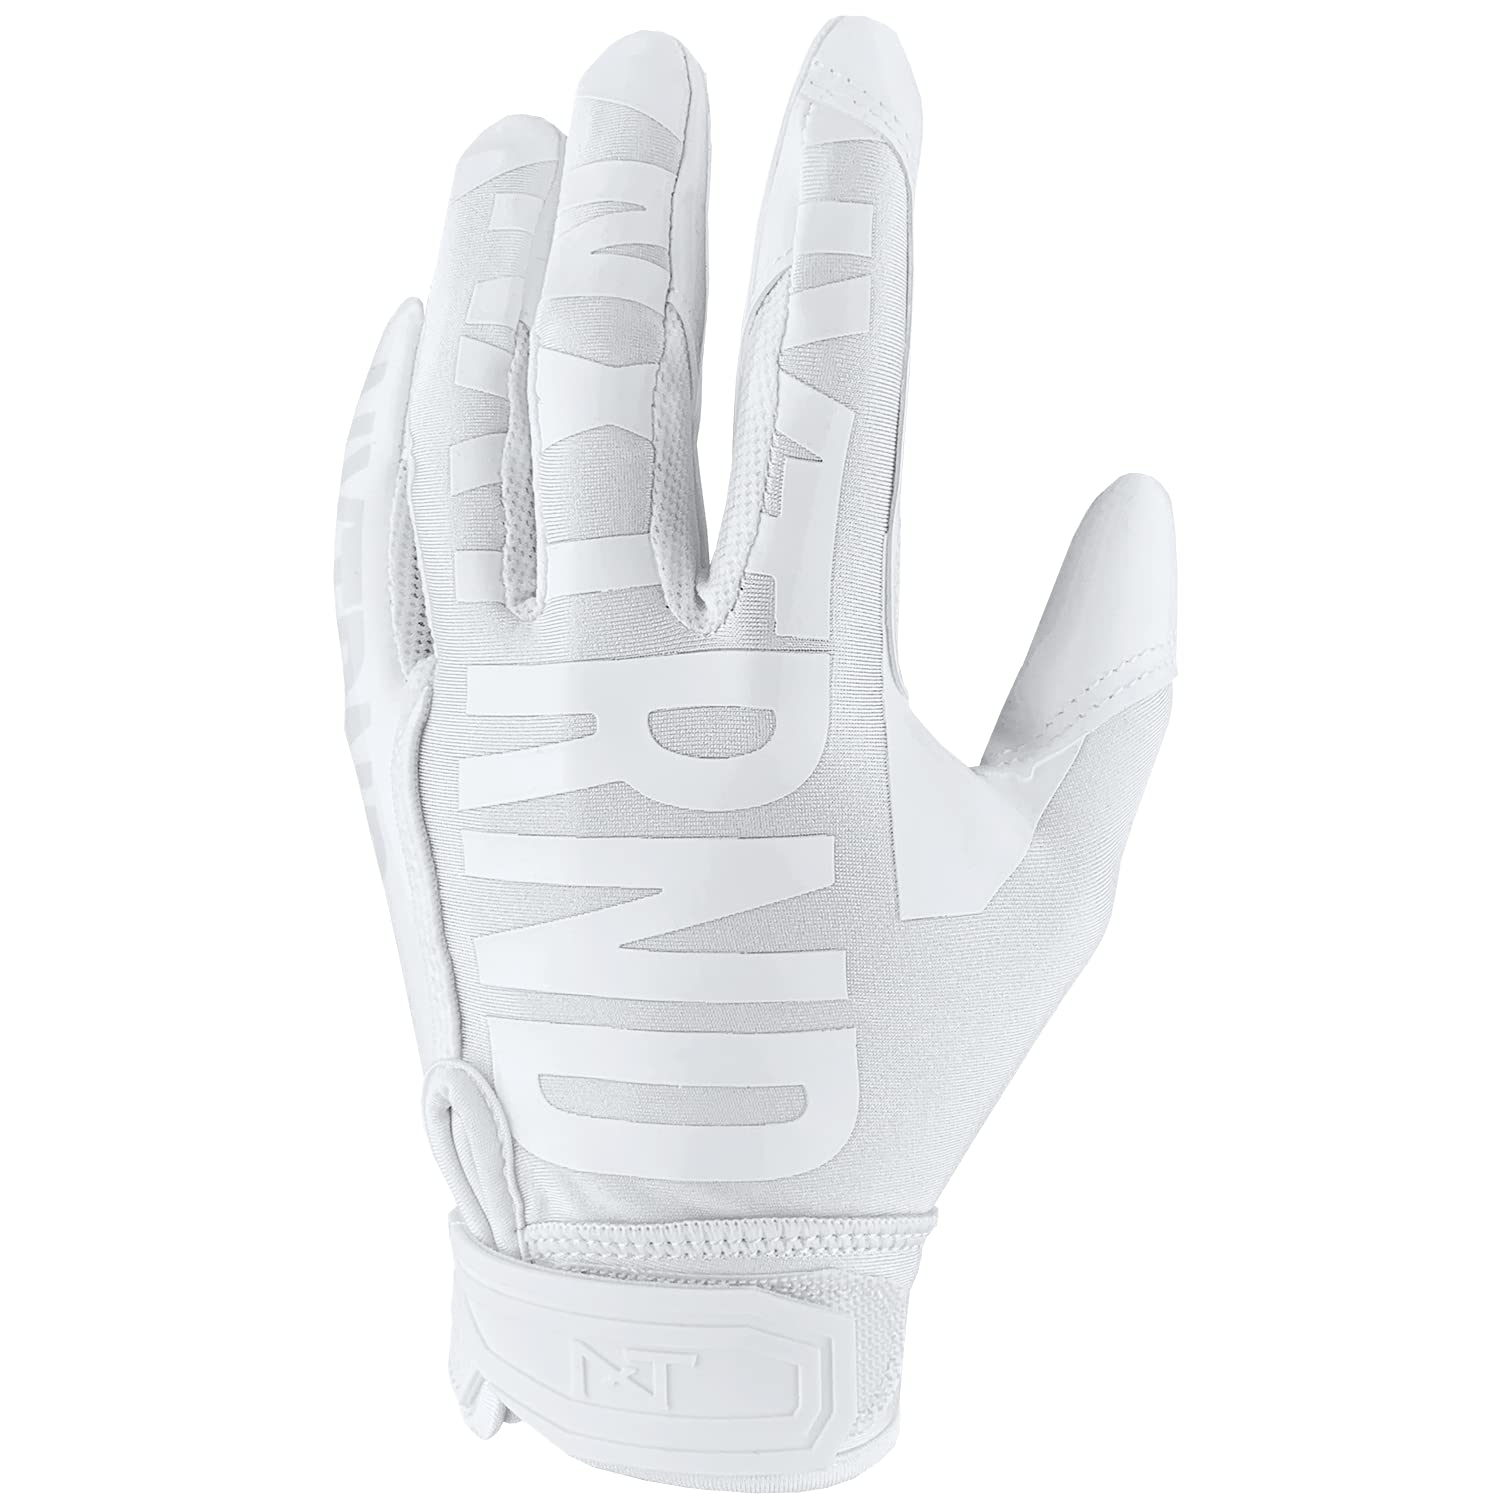 NXT NXTRND Nxtrnd g1 Pro Football gloves, Mens & Youth Boys Sticky Receiver gloves (White, X-Large)